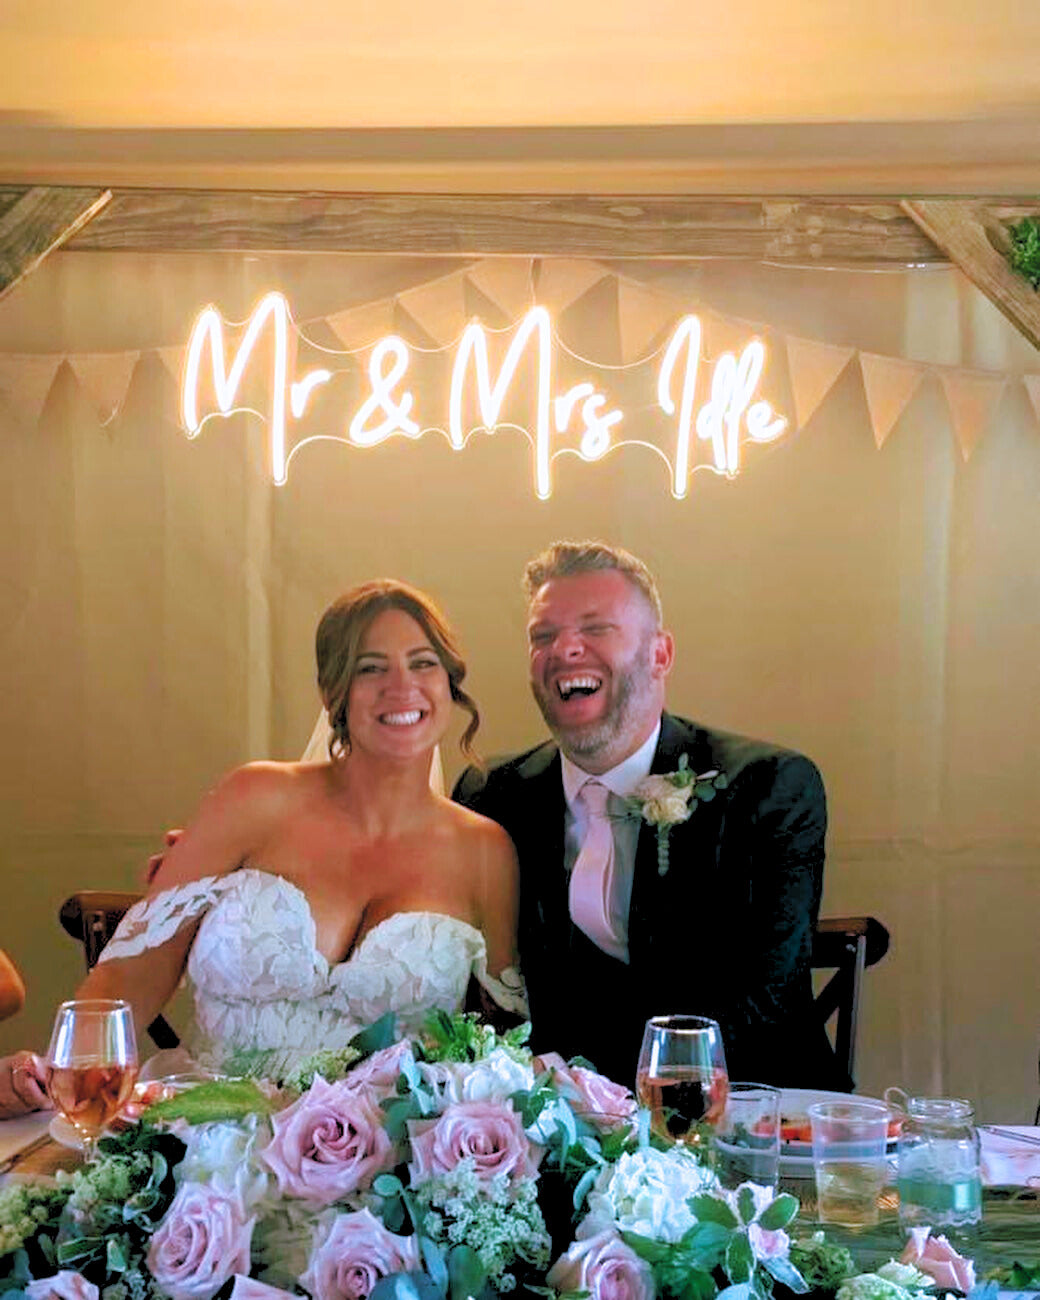 Custom Neon Wedding Signs - Create Your Own LED Wedding Sign